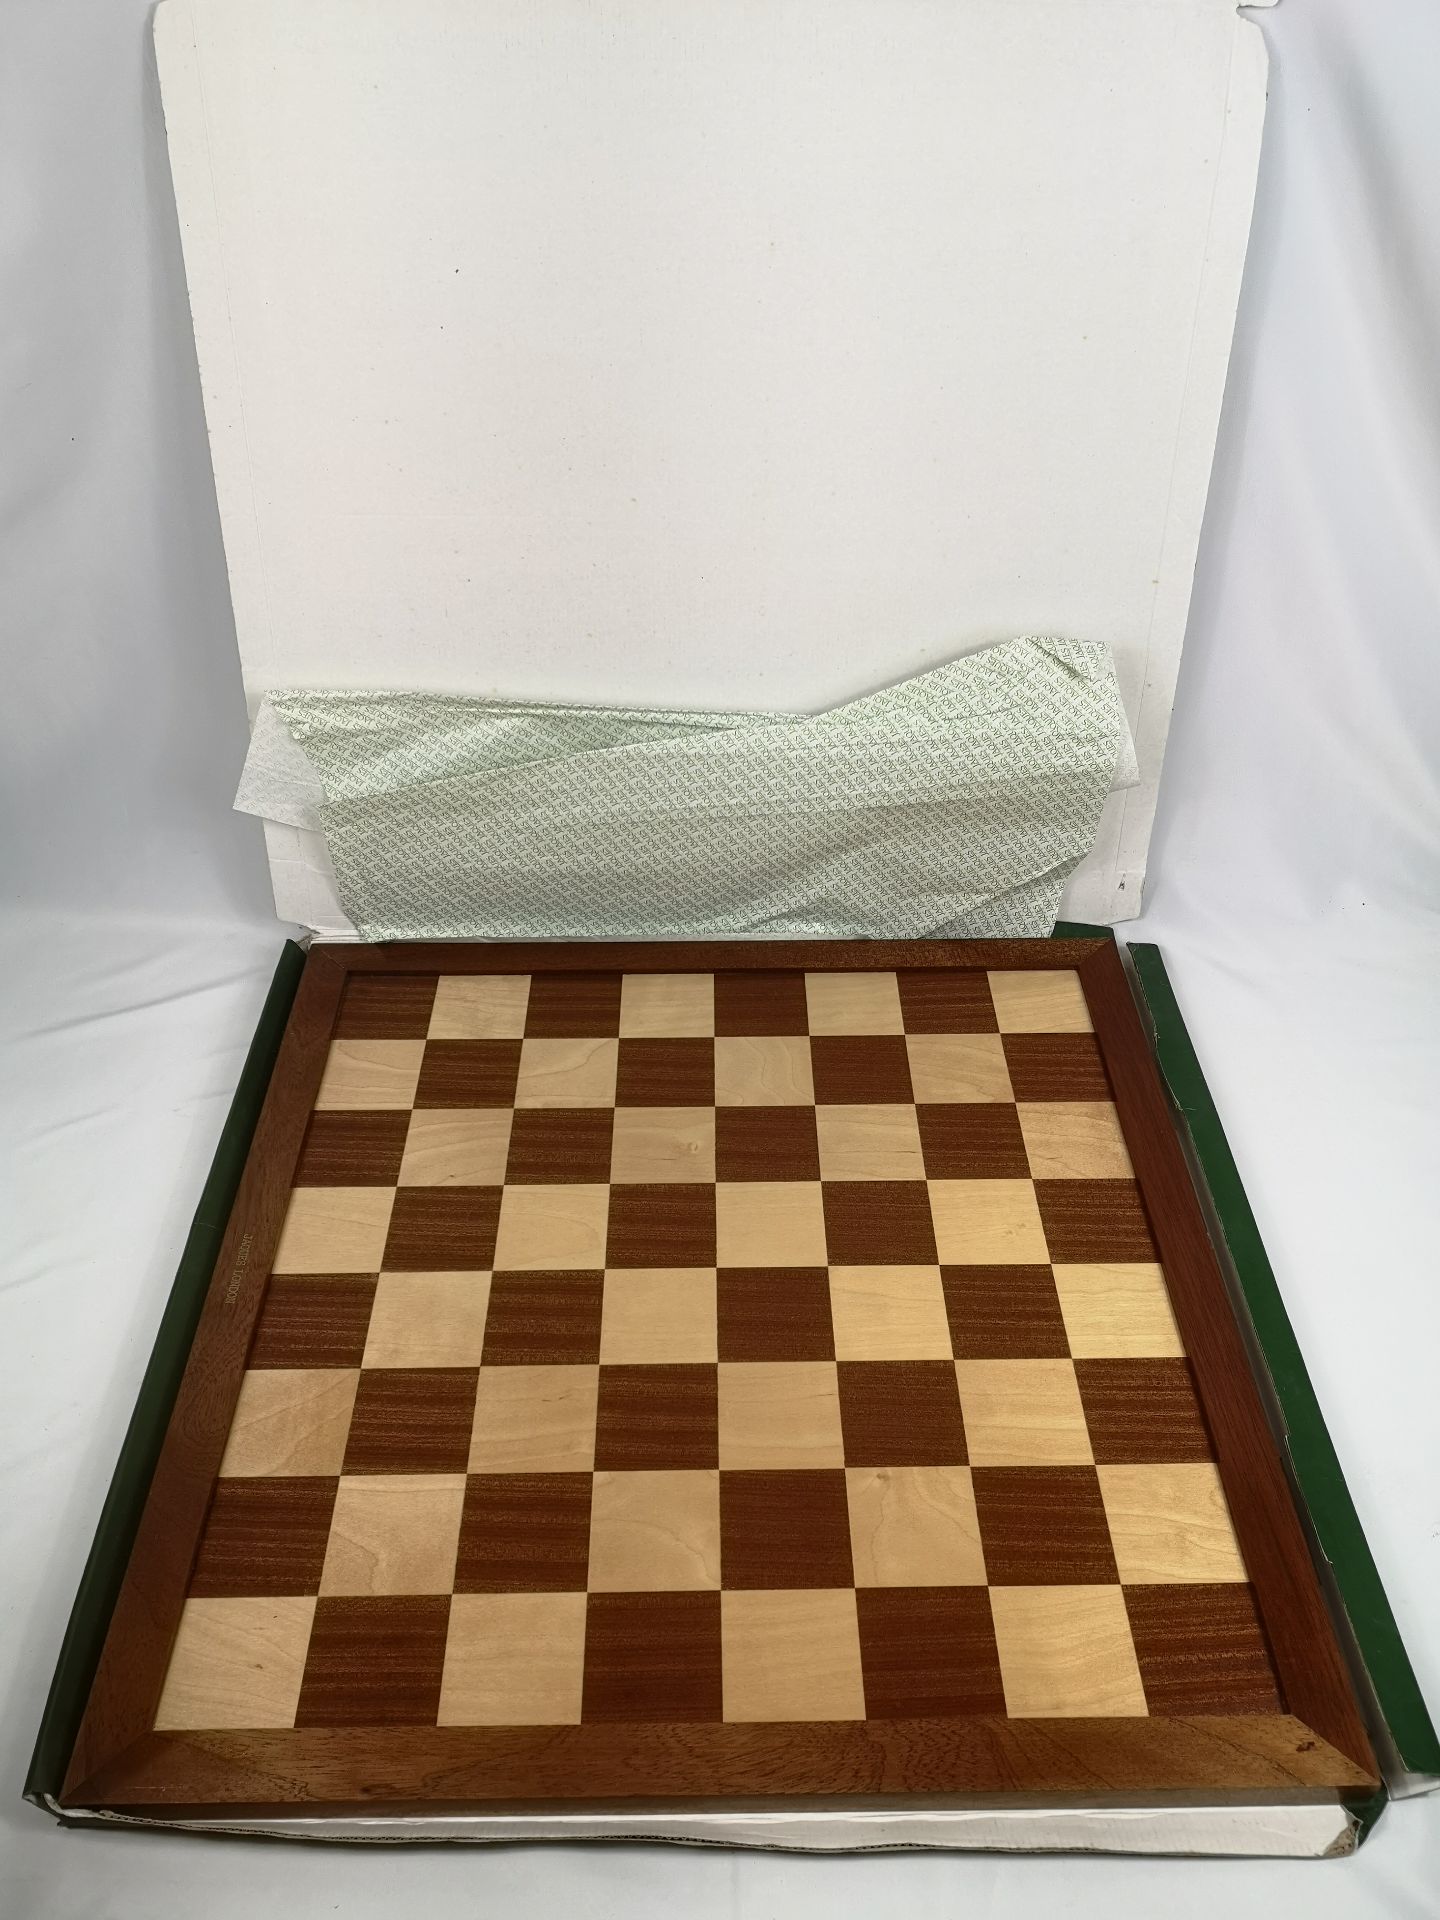 Jaques chess board - Image 3 of 4